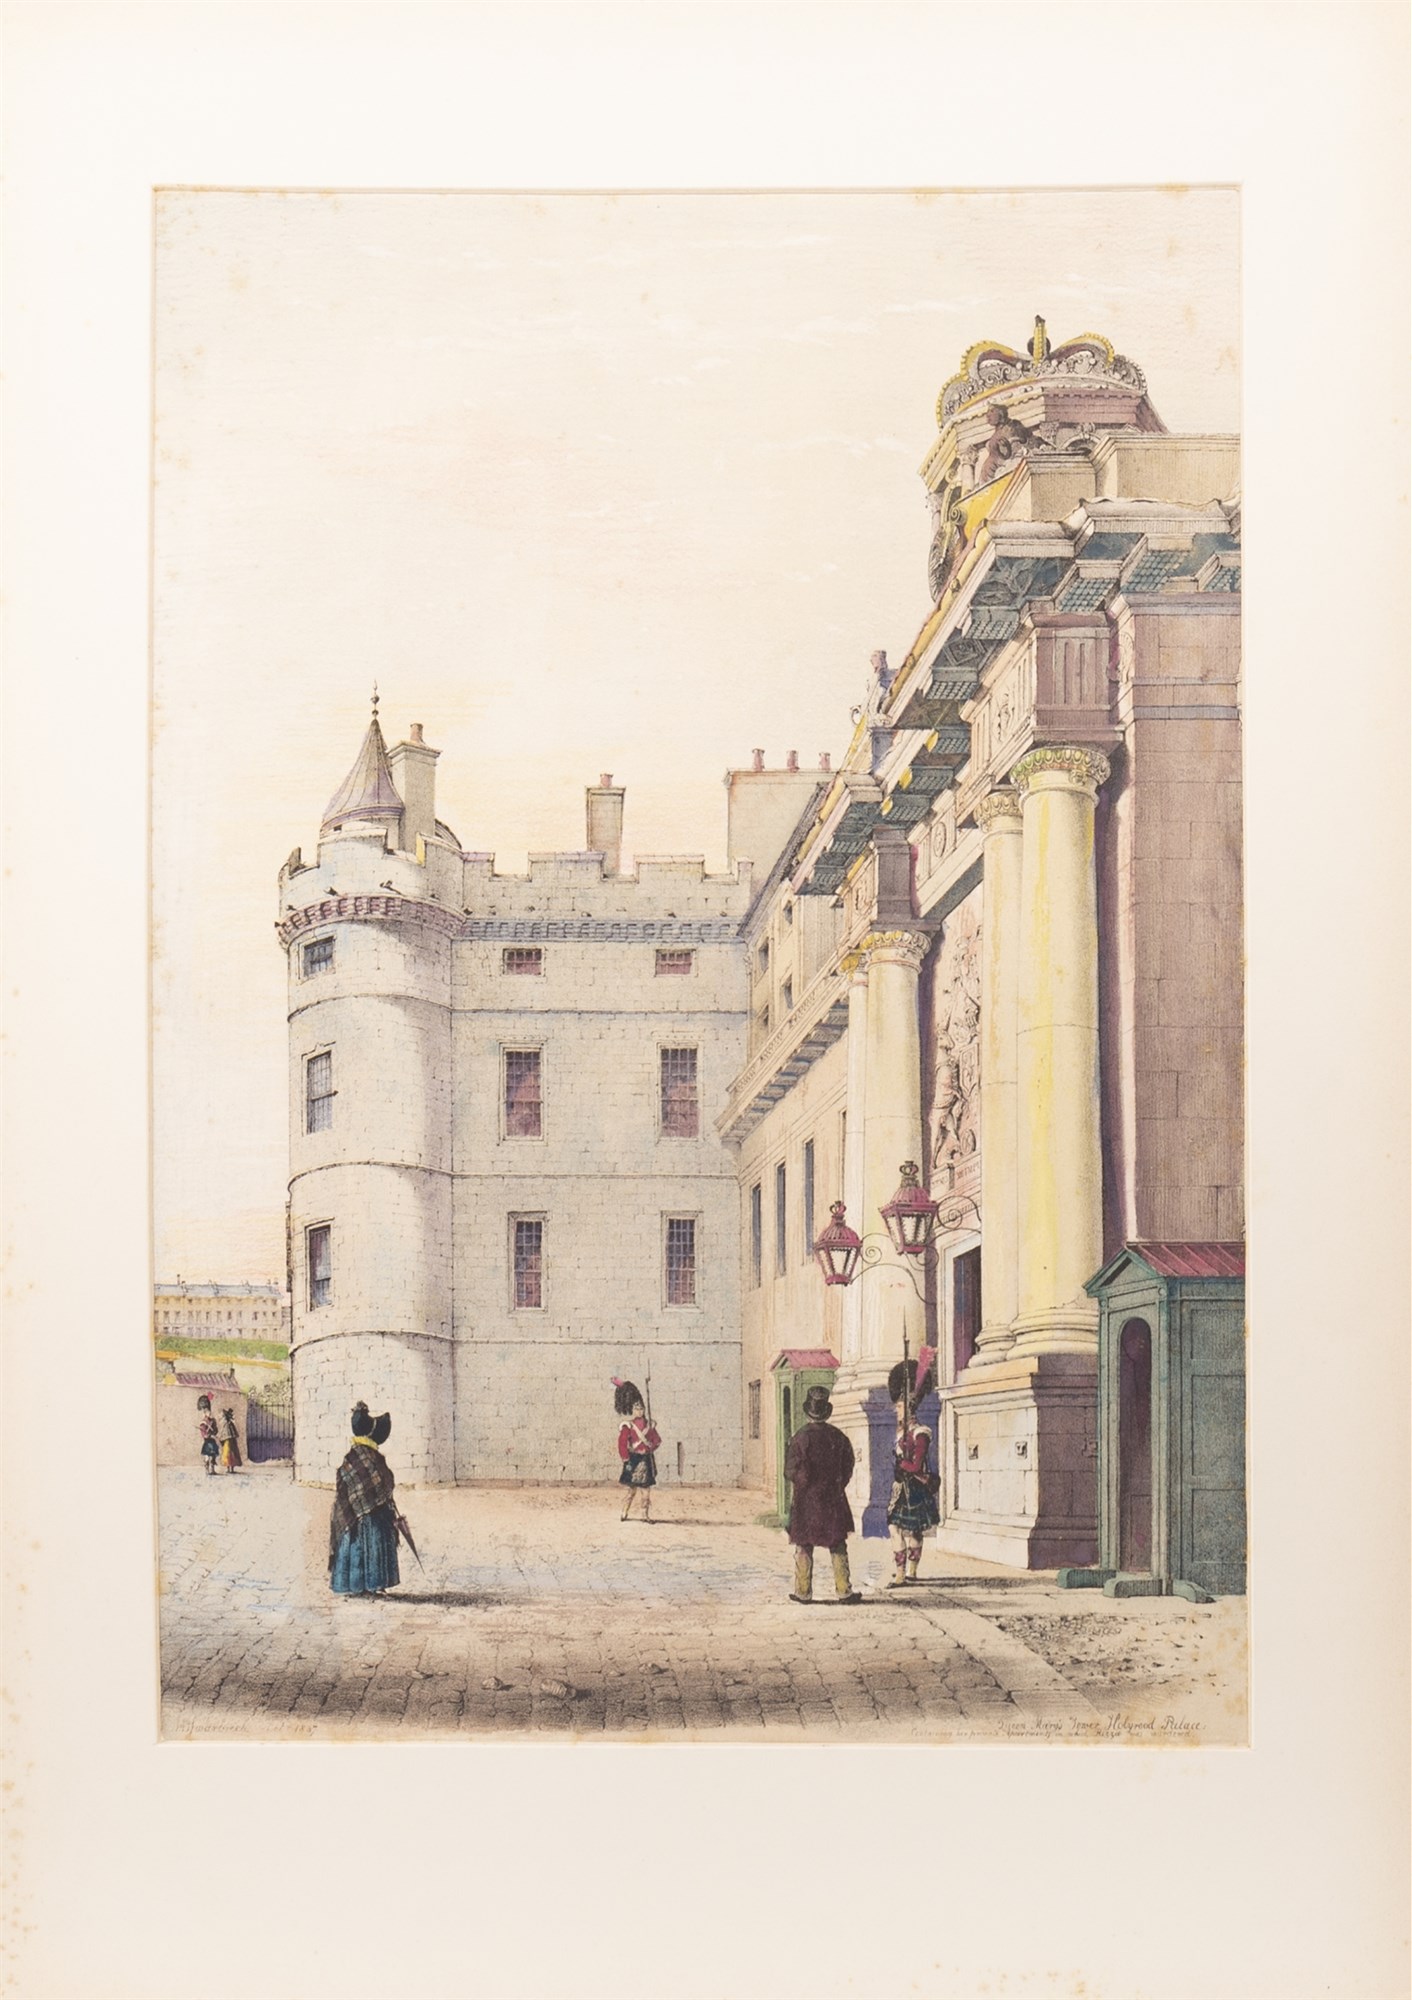 FOLIO OF HANDPAINTED LITHOGRAPHS, VOLUME OF SKETCHES IN SCOTLAND BY SAMUEL DUNKINFIELD SWARBRECK - Image 5 of 13